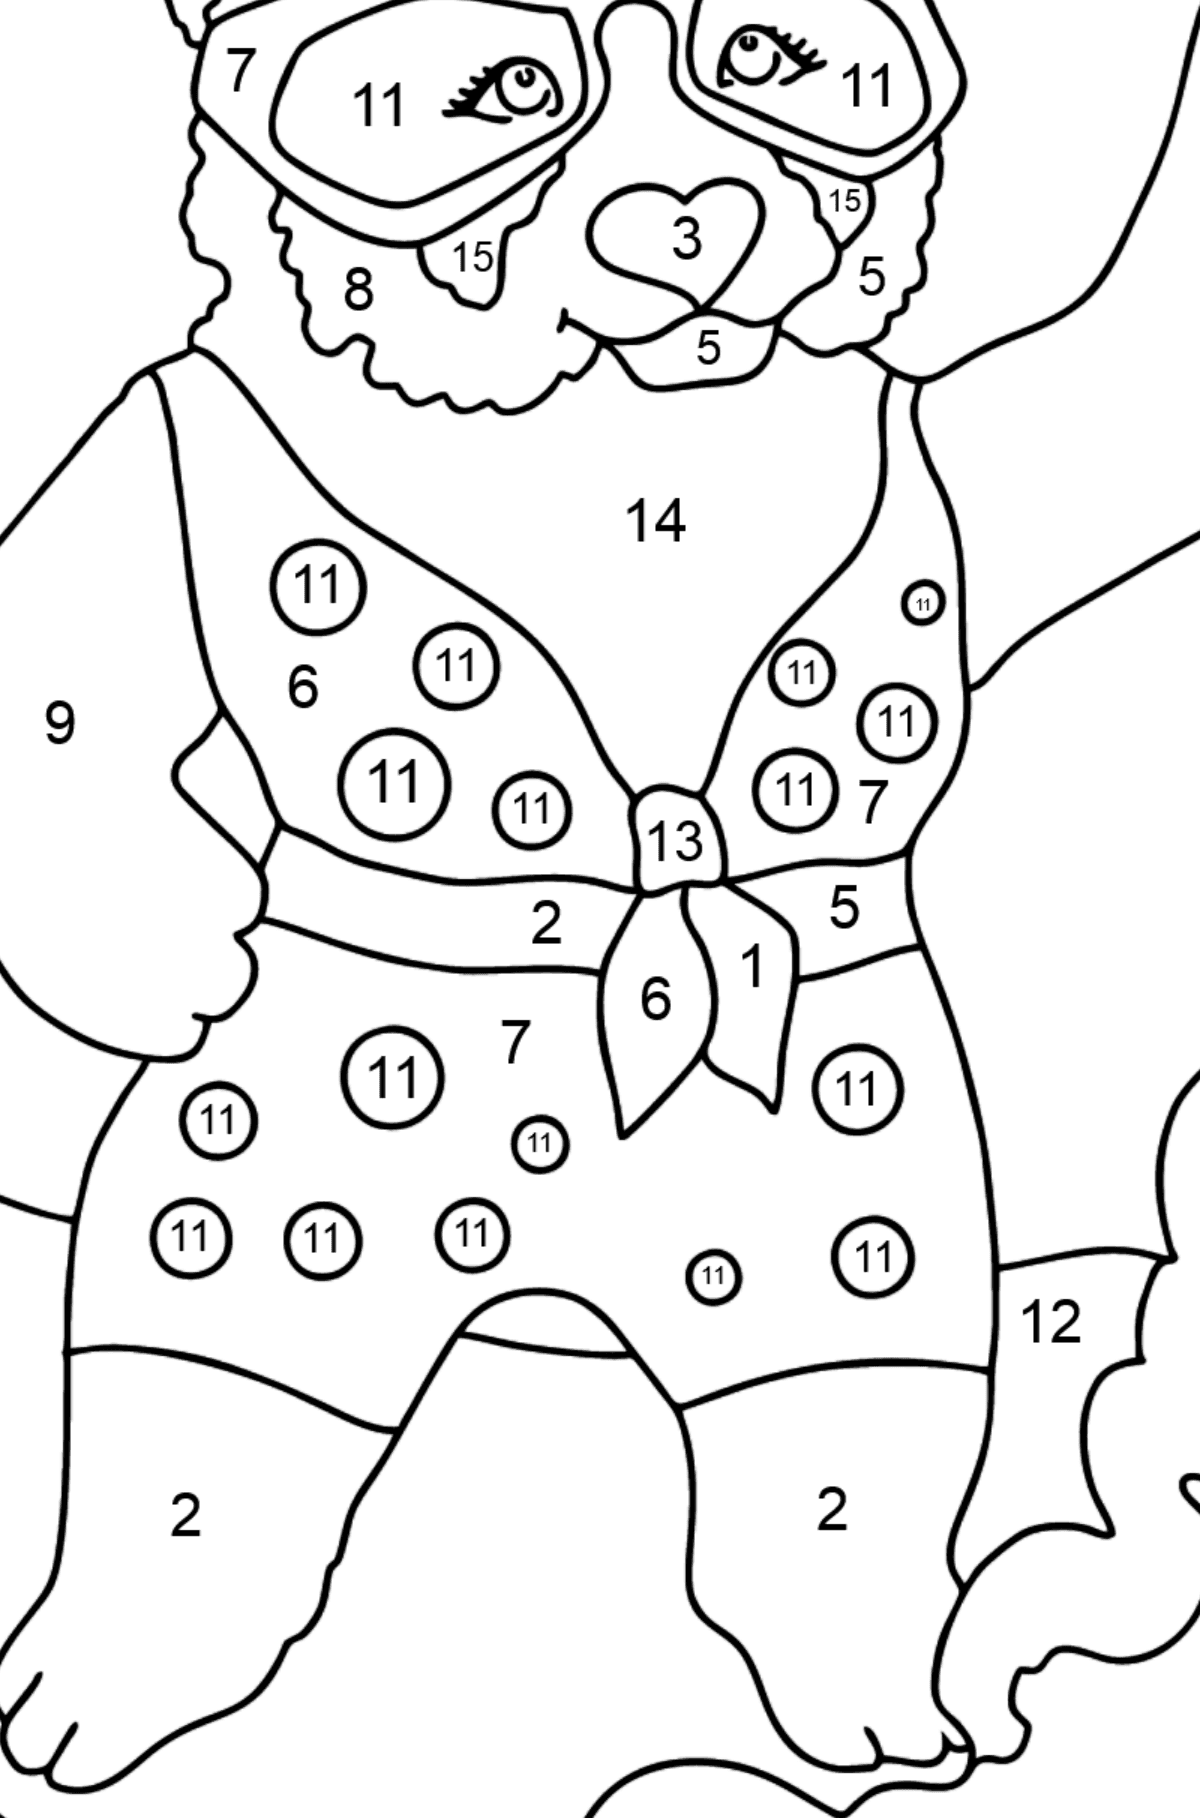 Coloring Page - A Panda is Catching a Wave - Coloring by Numbers for Kids